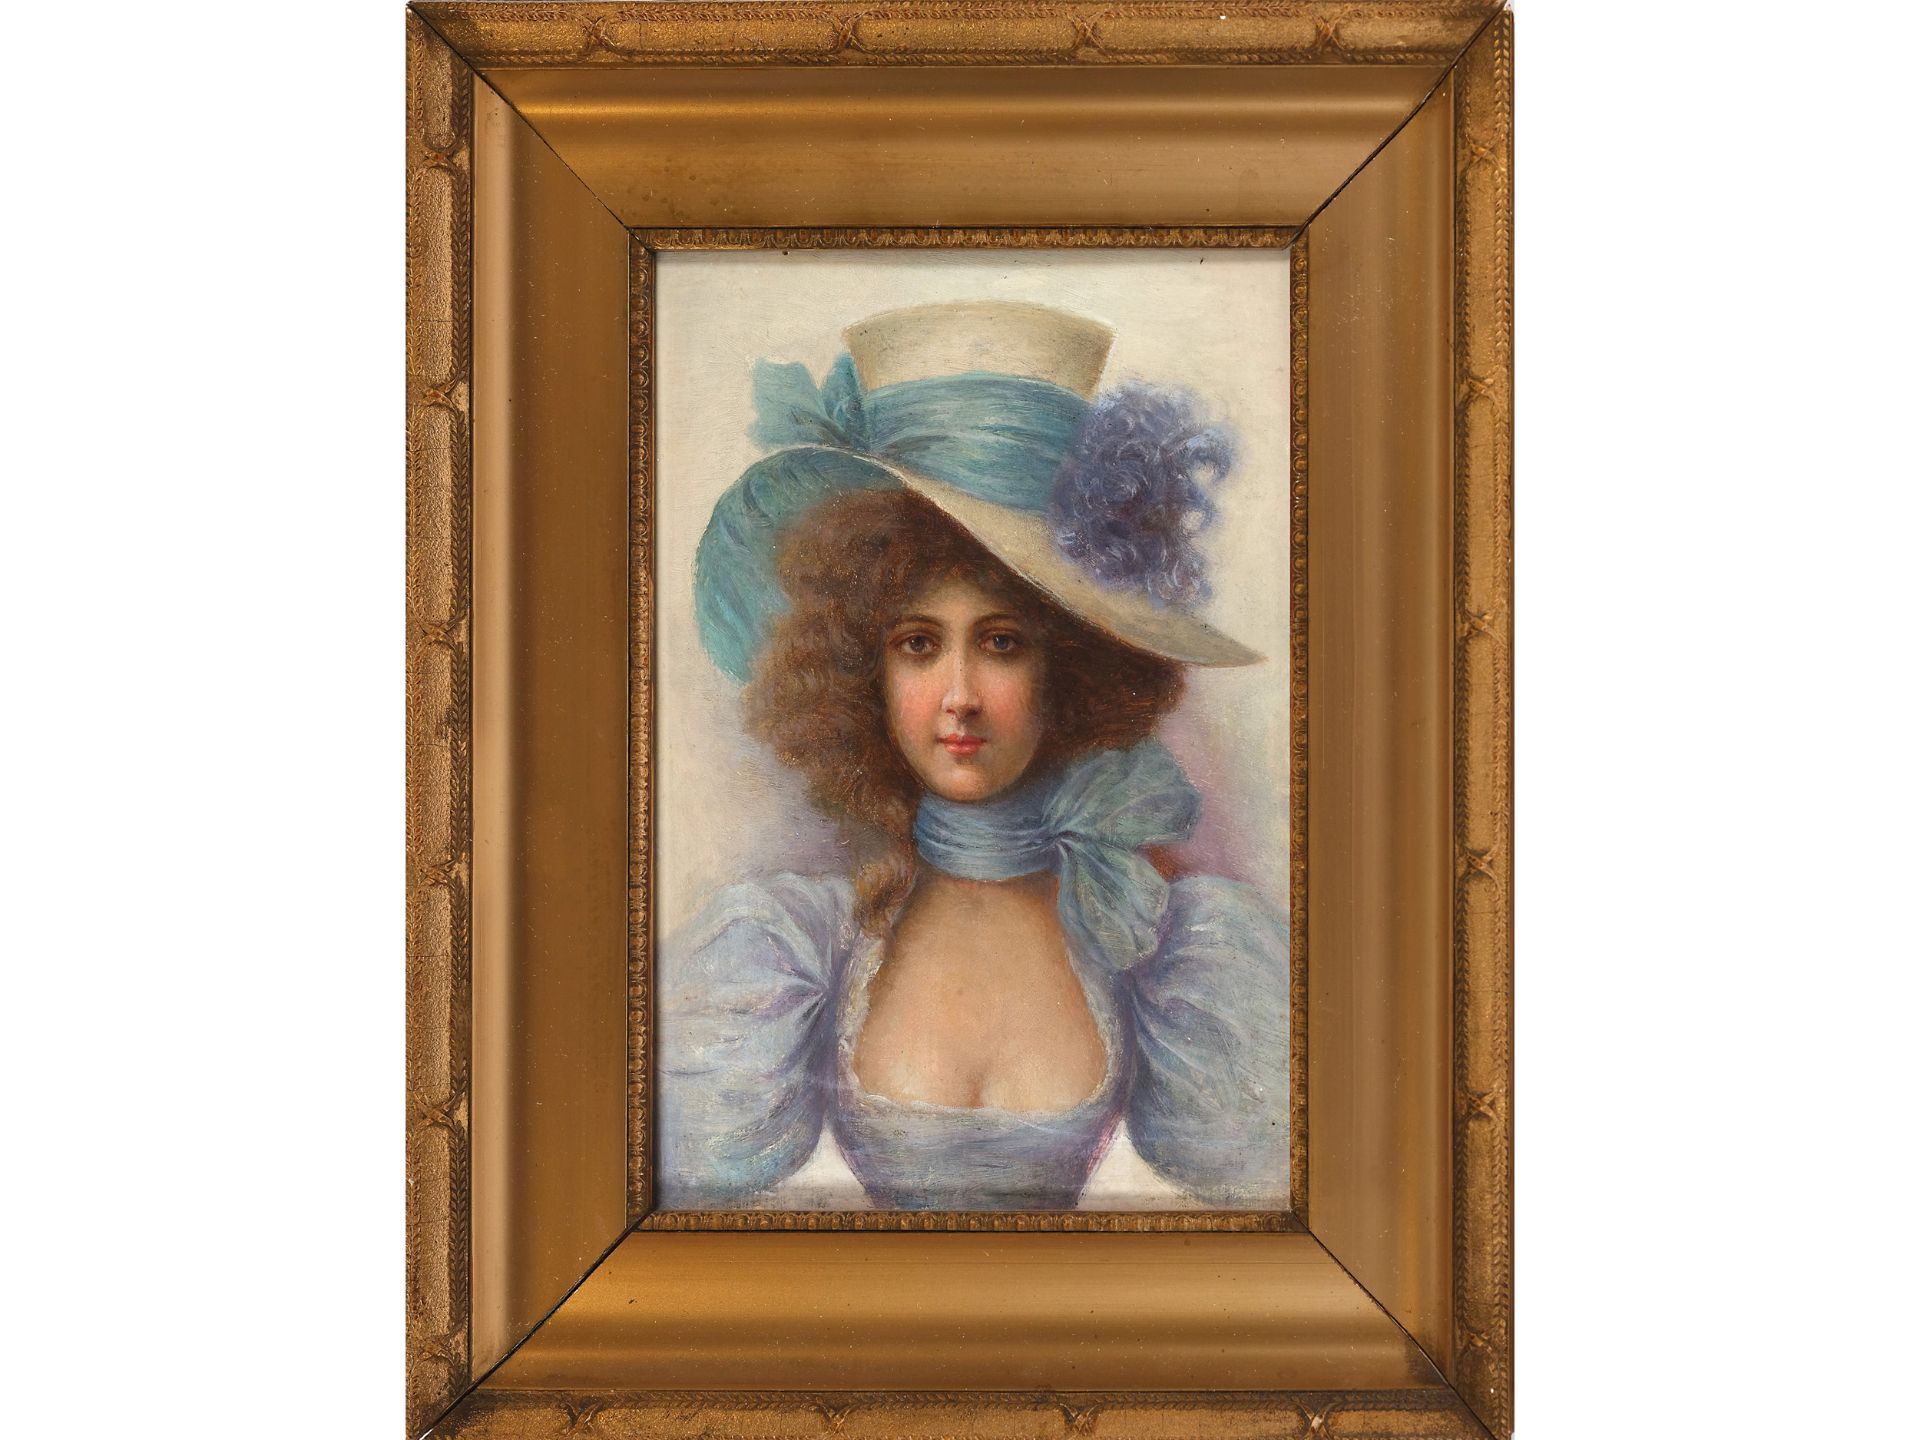 Unknown painter, around 1900, Portrait of a girl - Image 2 of 4